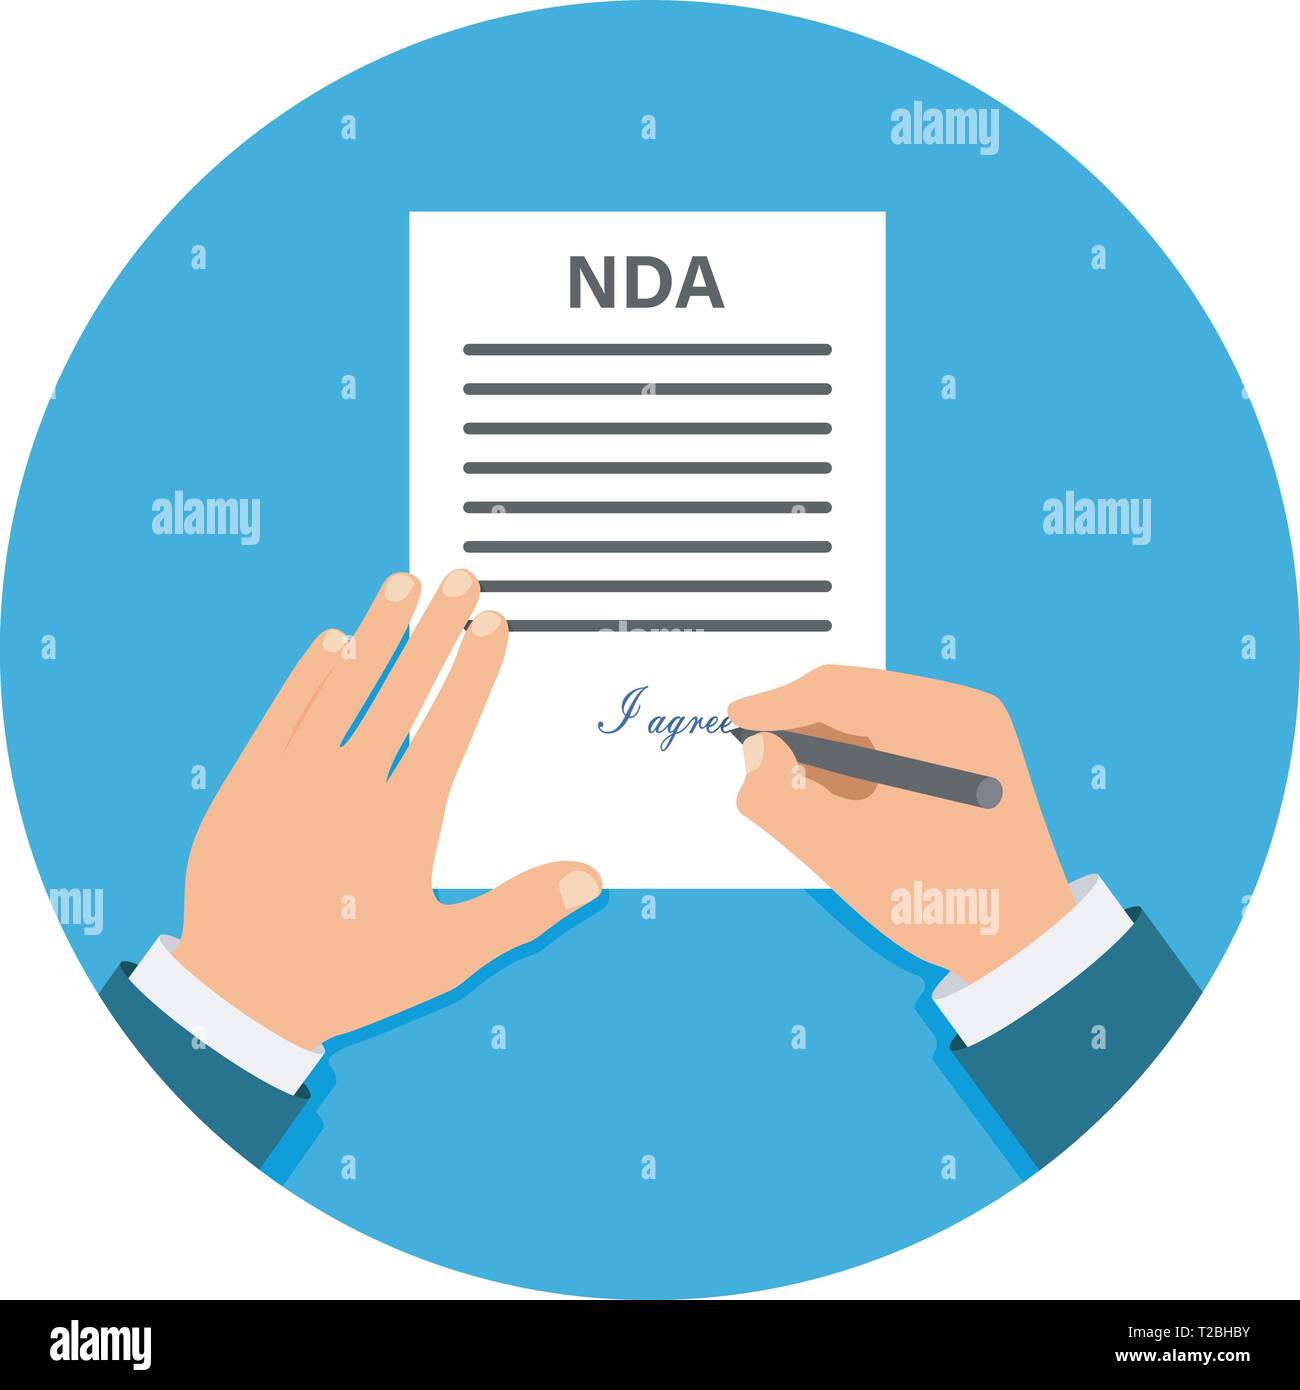 Colored Cartooned Hand Signing NDA. Contract Signed document. NDA concept. Secret files. Stock Vector